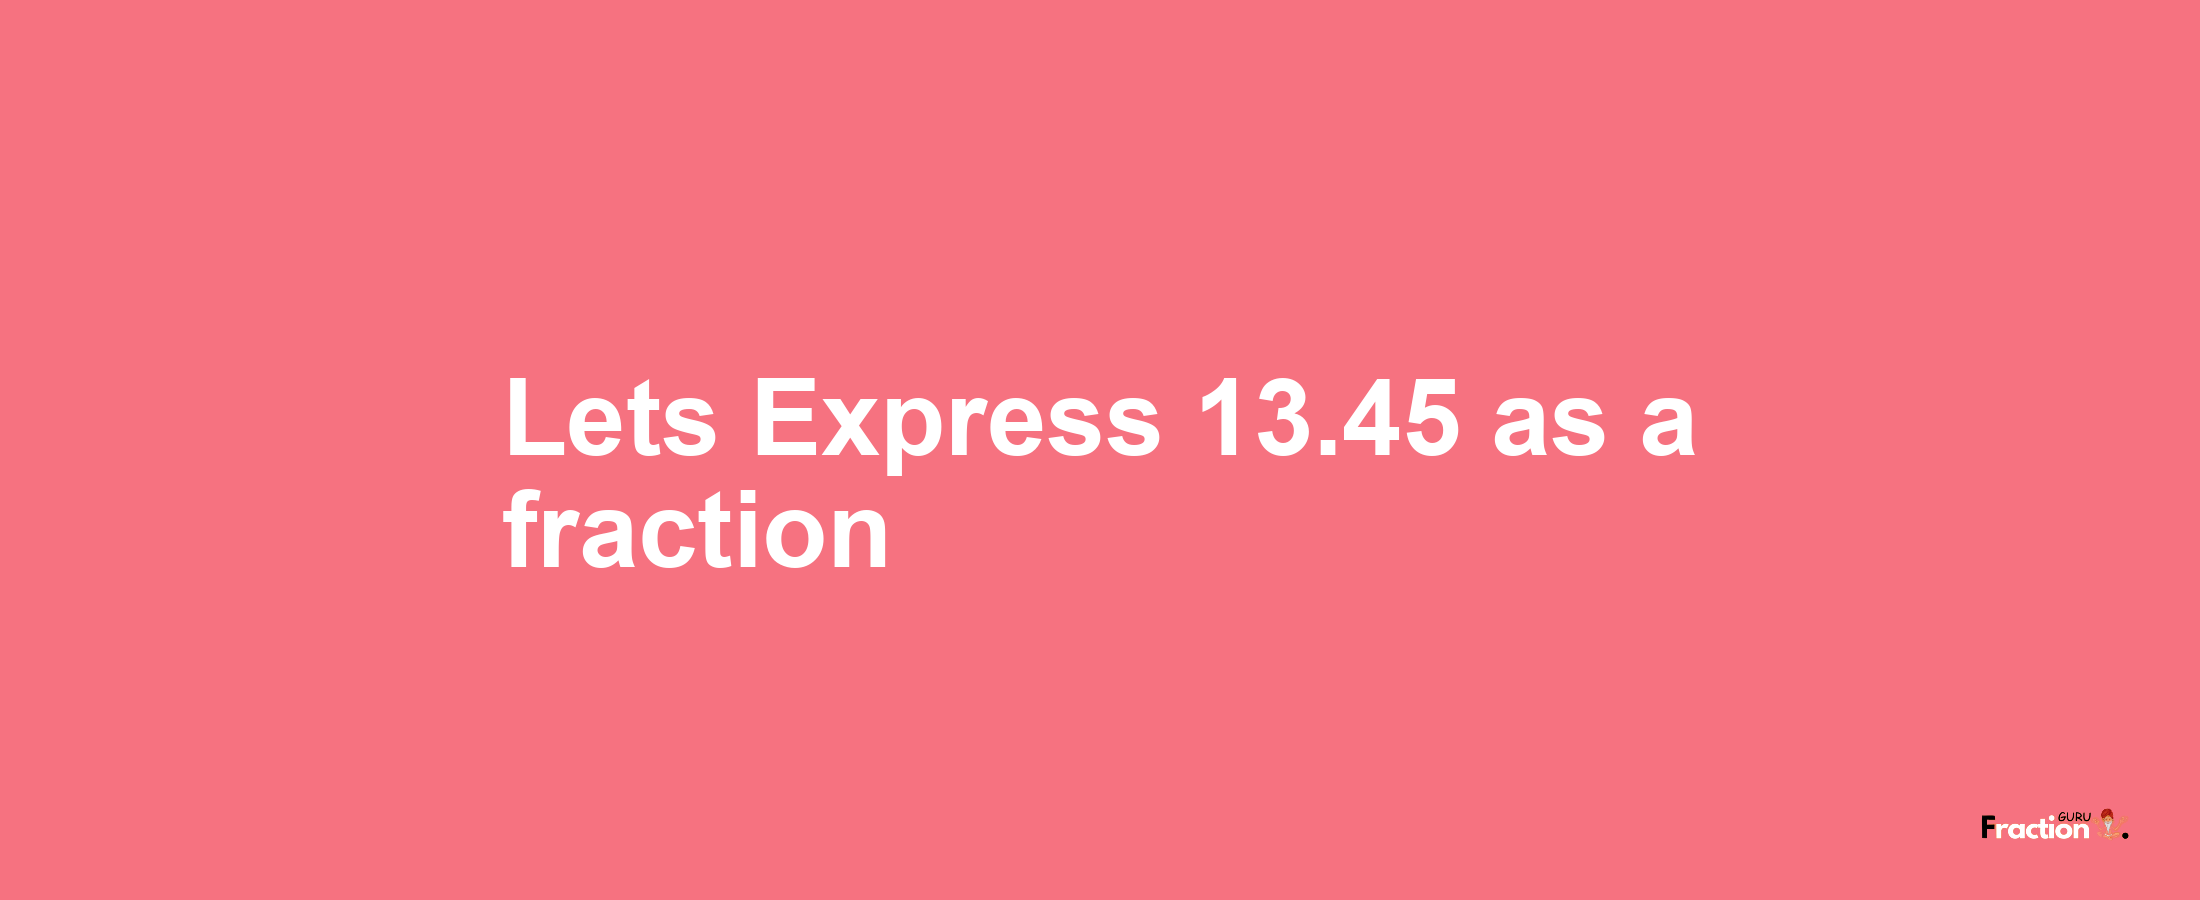 Lets Express 13.45 as afraction